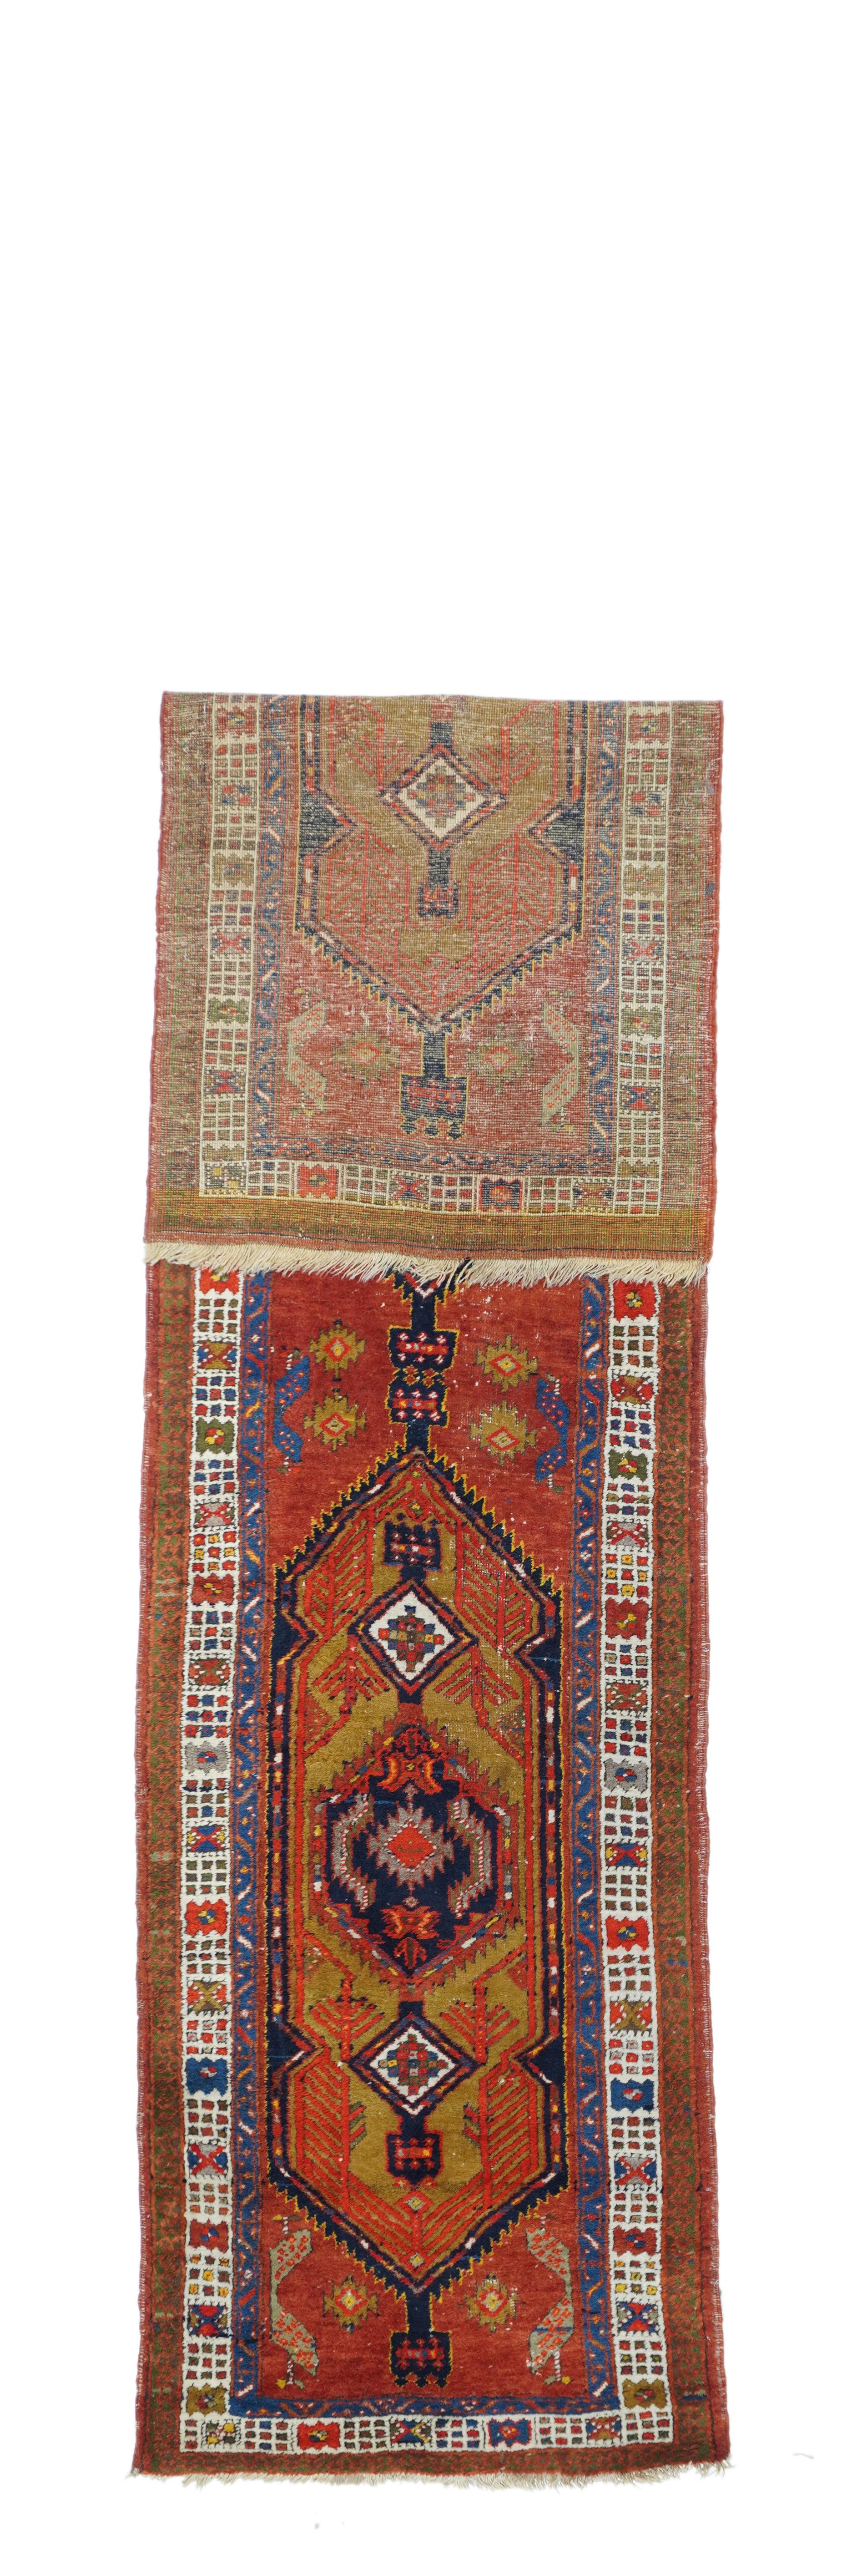 The NW Persian town of Sarab is at one corner lof the Heriz District, and usually weaves all wool runners, but here is a classic camel-hair tone piece on cotton. The field shows two complete characteristic tall hexagons with pendanted conforming